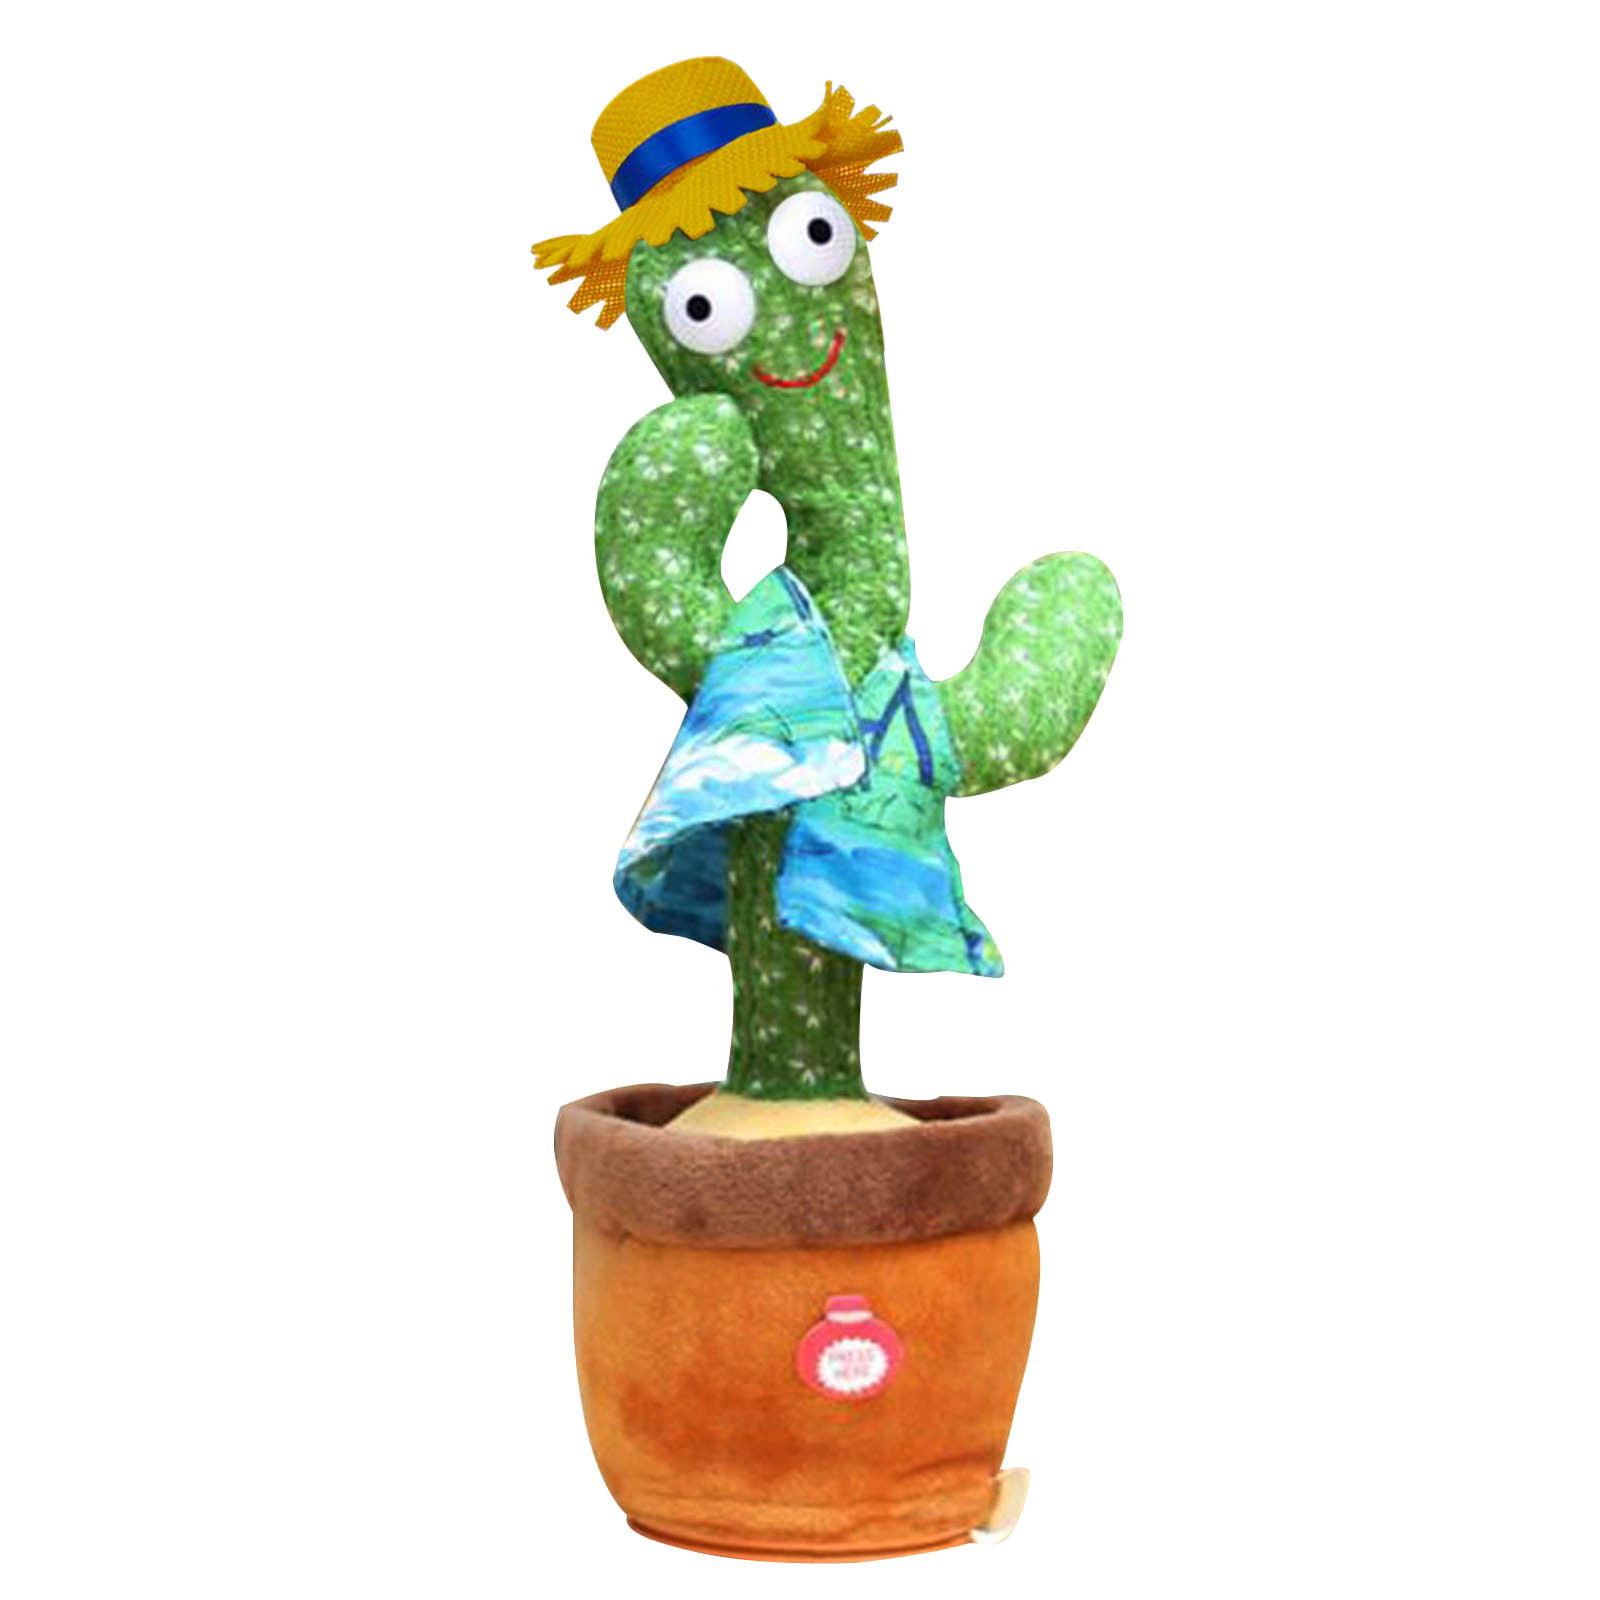 Dancing Cactus Plush Toy Electronic Shake with song cute Dance Succulent lovers 